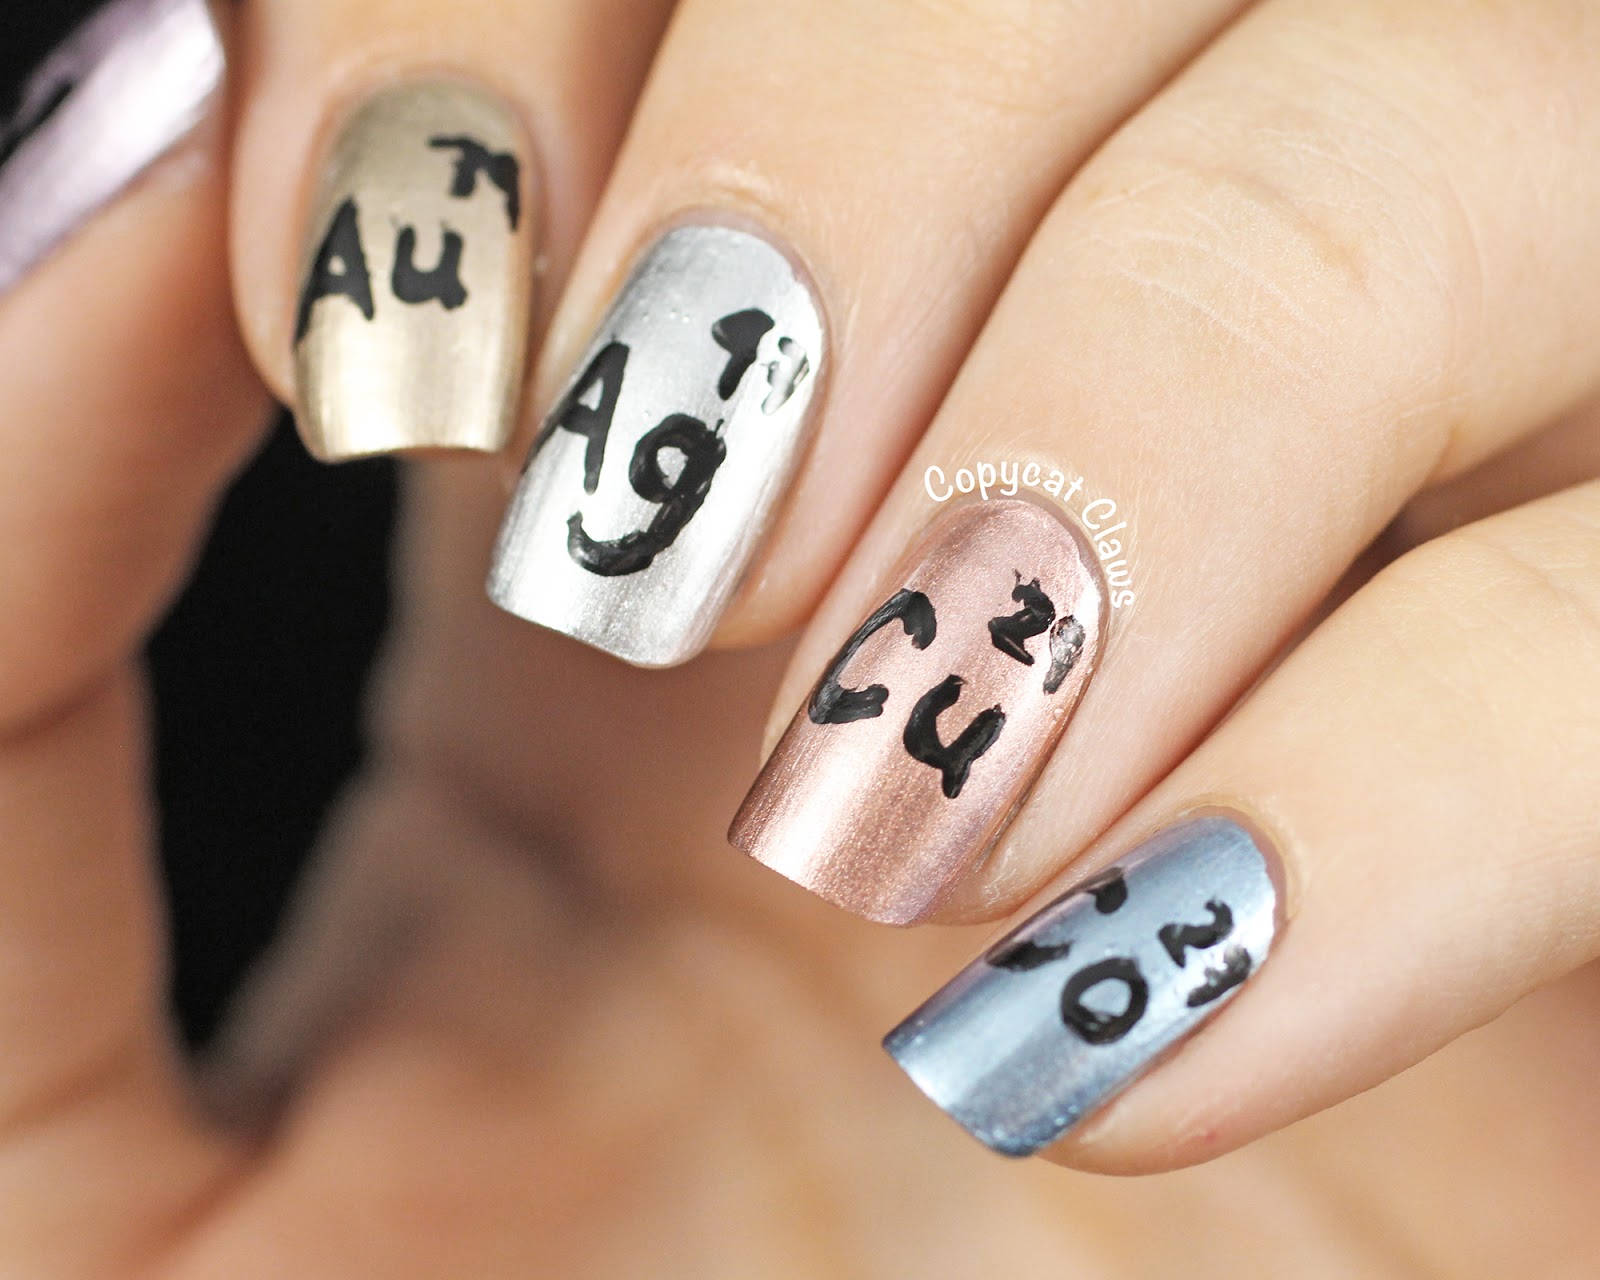 5. Metallic nail art with studs - wide 10